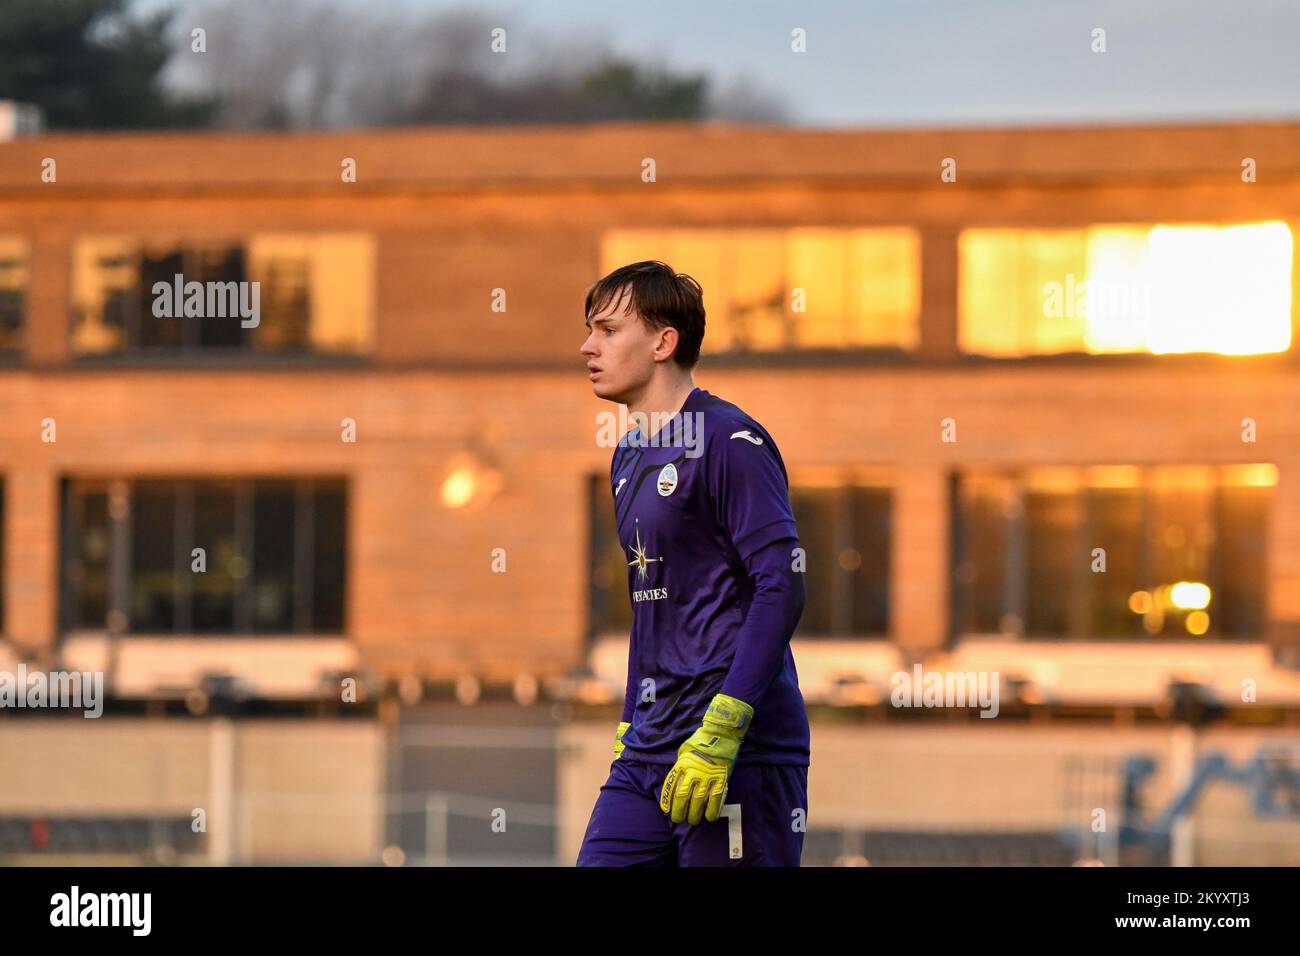 Swansea, Wales. 2 December 2022. Goalkeeper Remy Mitchell of Swansea City during the Premier League Cup game between Swansea City Under 21 and Stoke City Under 21 at the Swansea City Academy in Swansea, Wales, UK on 2 December 2022. Credit: Duncan Thomas/Majestic Media/Alamy Live News. Stock Photo